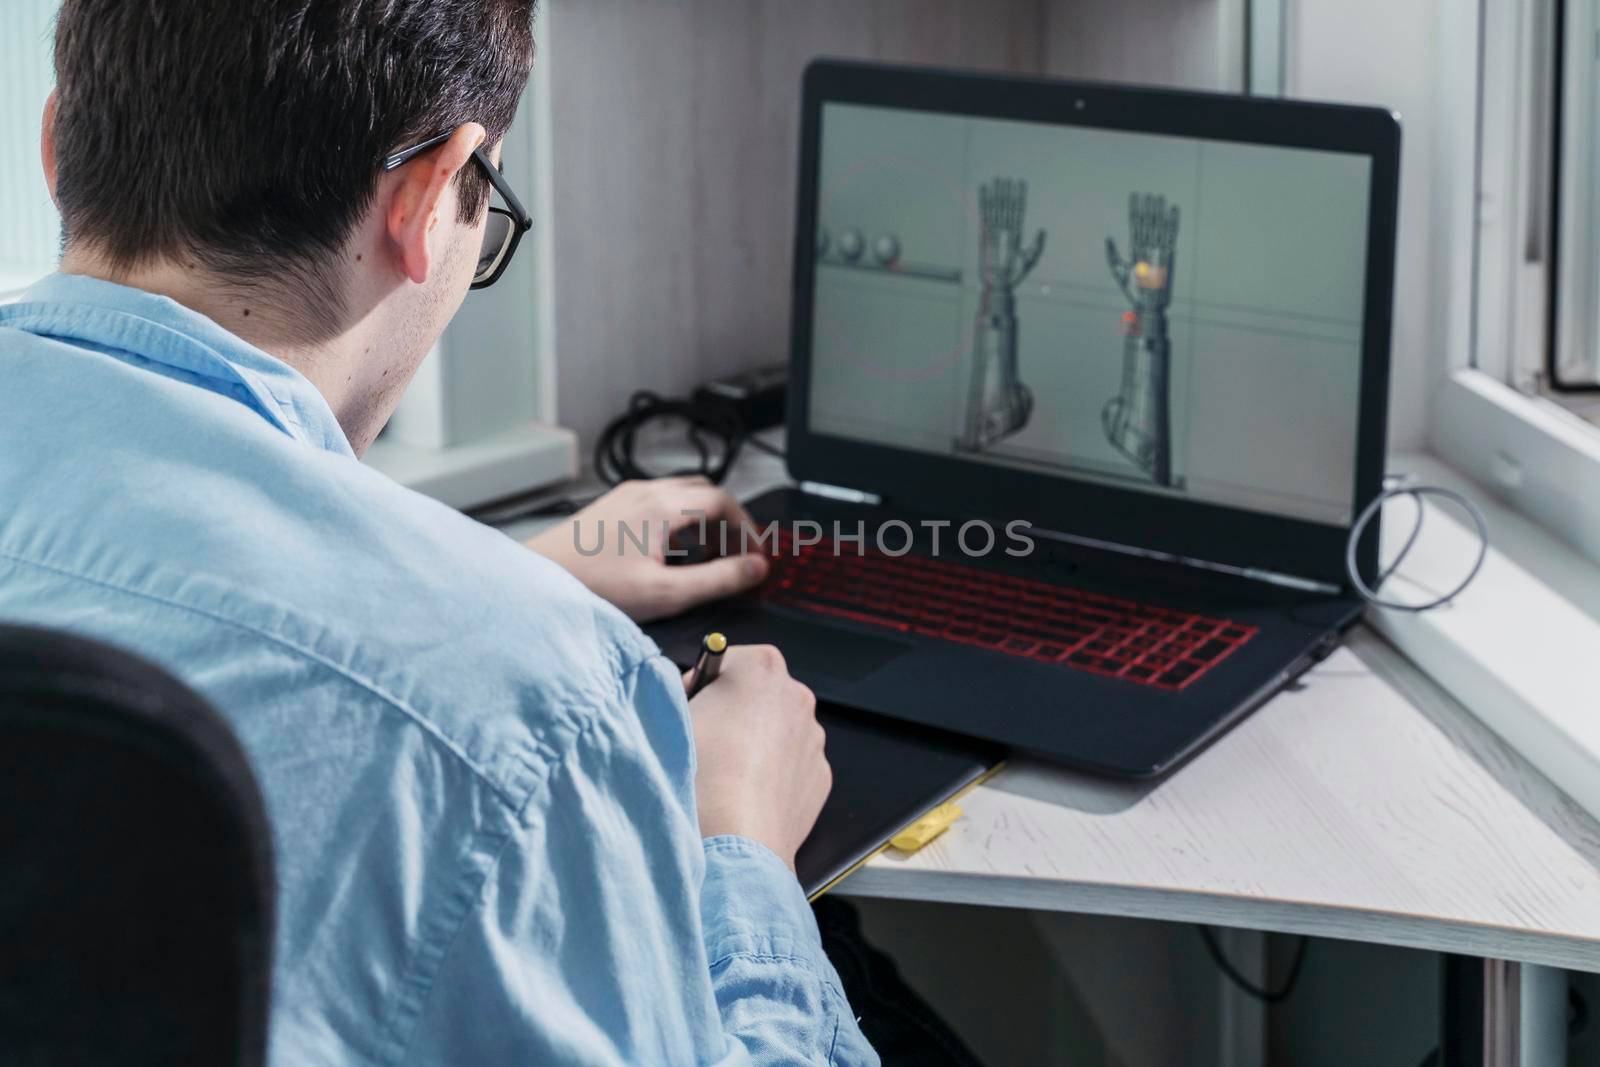 digital artist working on 3d graphics using a graphics tablet.